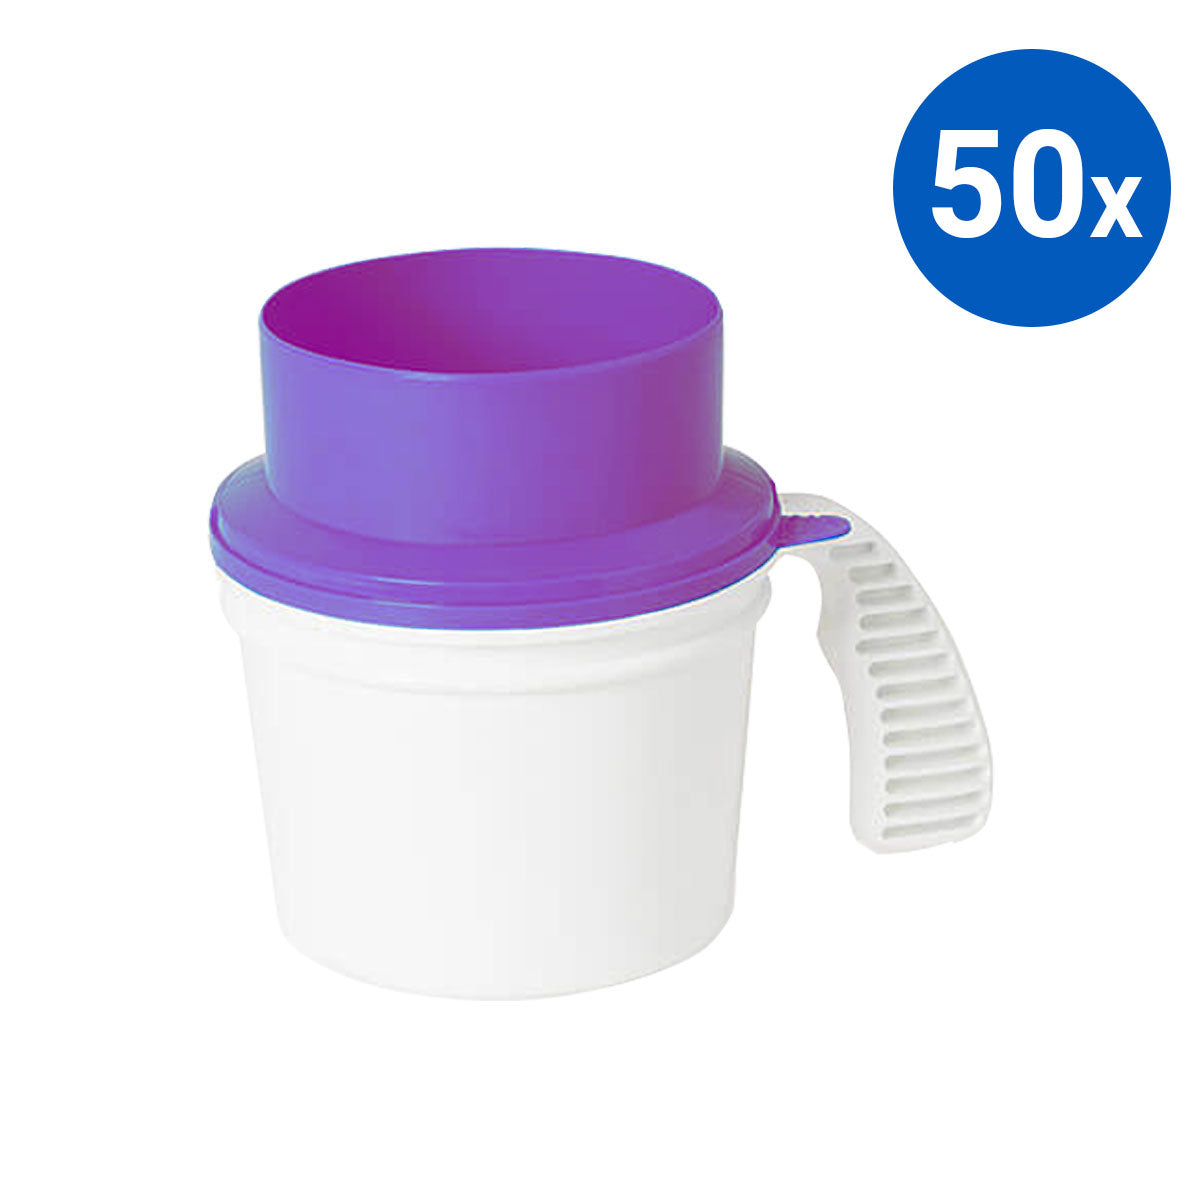 50x Collection Container Base and Quick Drop Lid - Purple